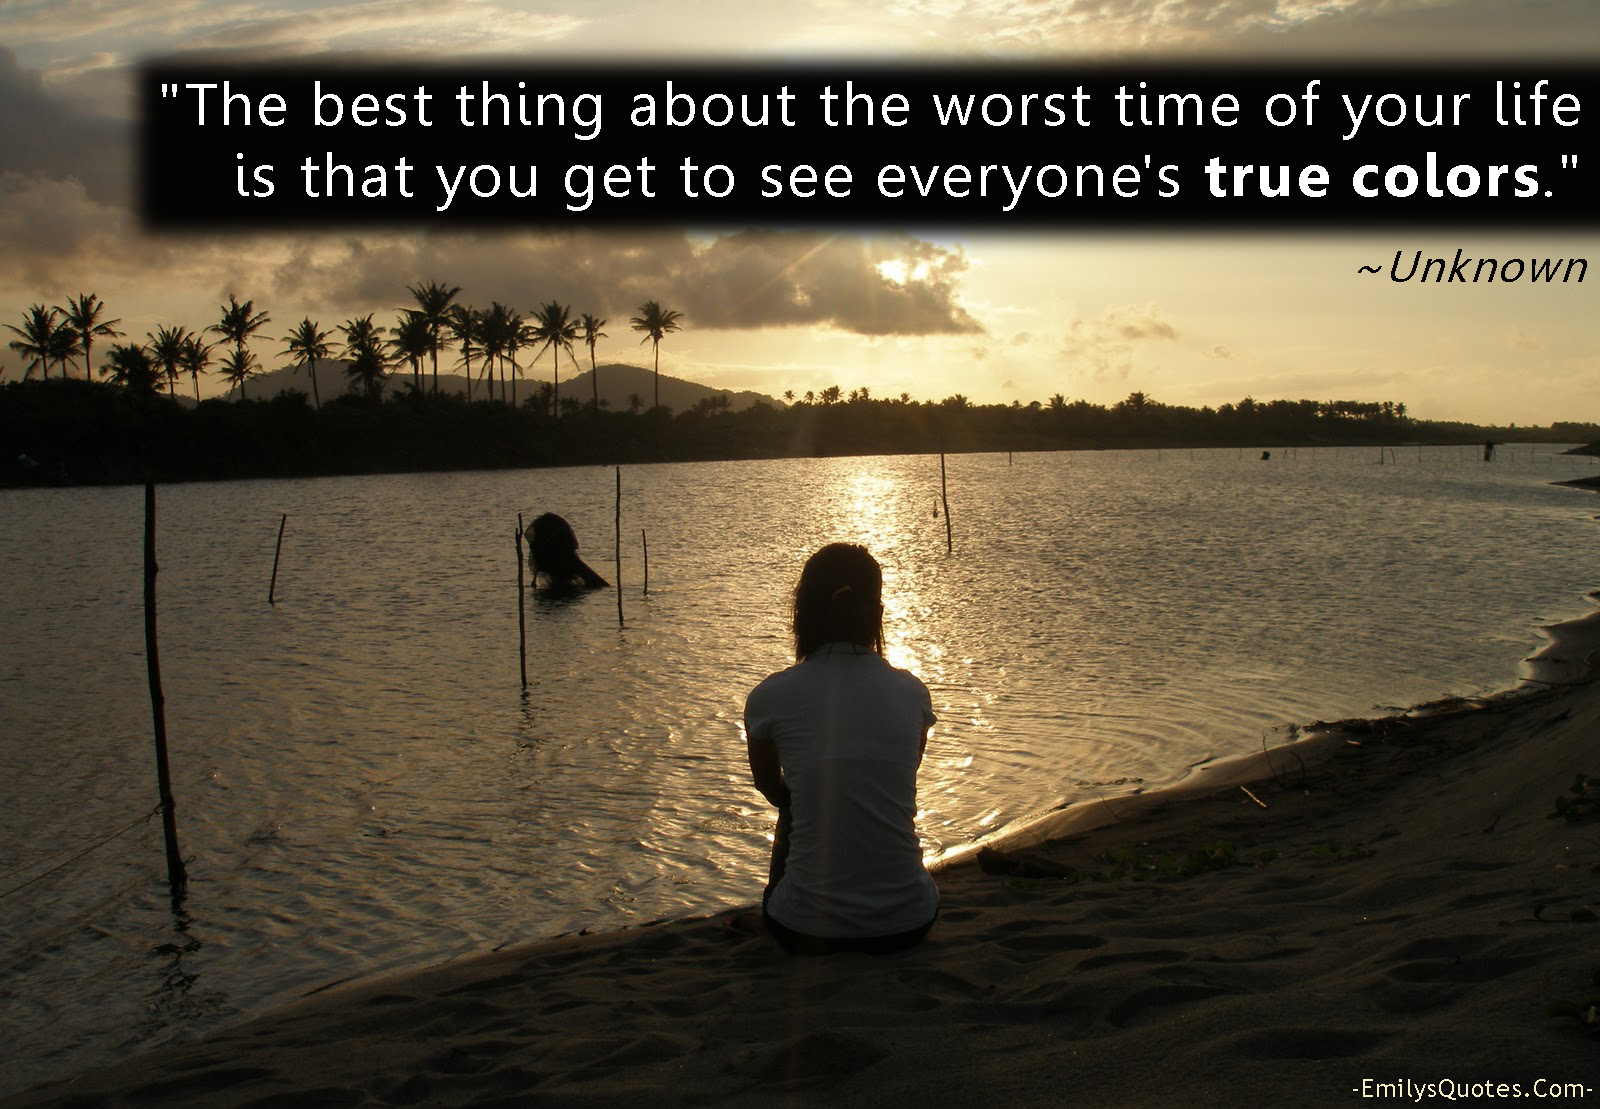 The best thing about the worst time of your life is that you get to see everyone’s true colors